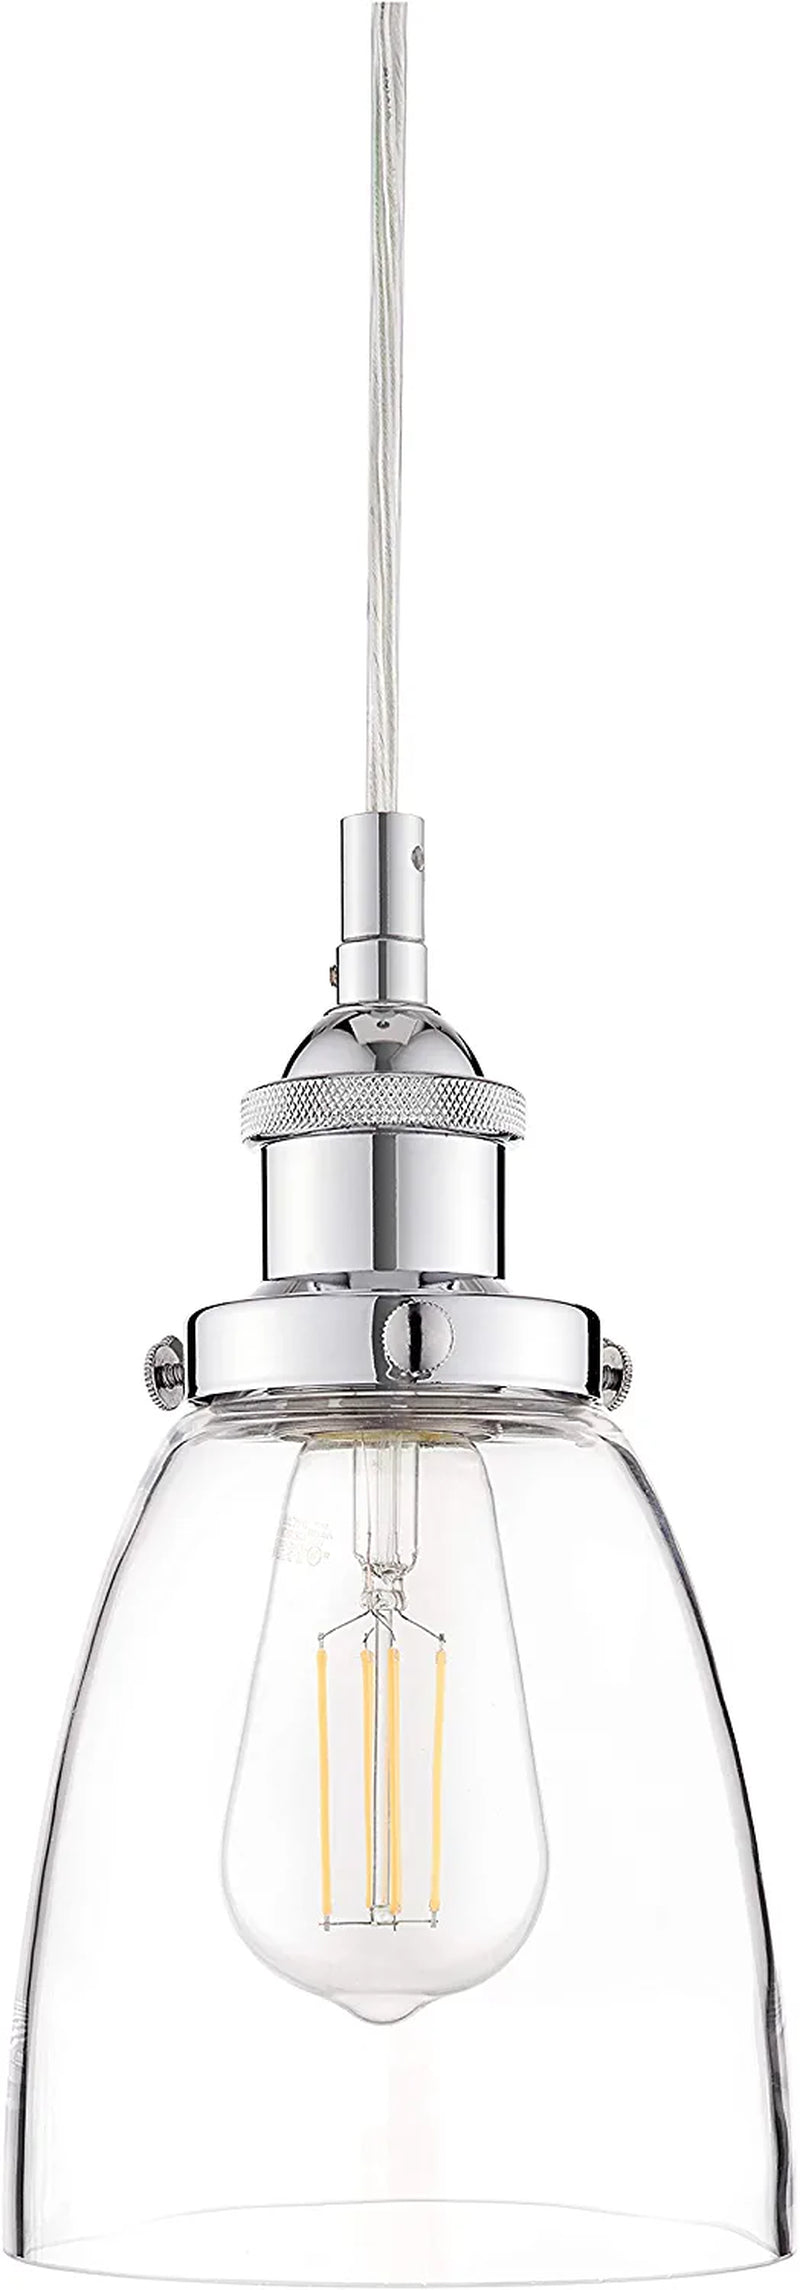 Linea Di Liara Fiorentino Large Glass Pendant Light Fixture Modern Farmhouse Bell Shaped Kitchen Pendant Lighting over Island Brushed Nickel Pendant Light Shade over Sink Lighting Fixtures, UL Listed Home & Garden > Lighting > Lighting Fixtures Linea di Liara Polished Chrome Clear Glass with LED Bulb 